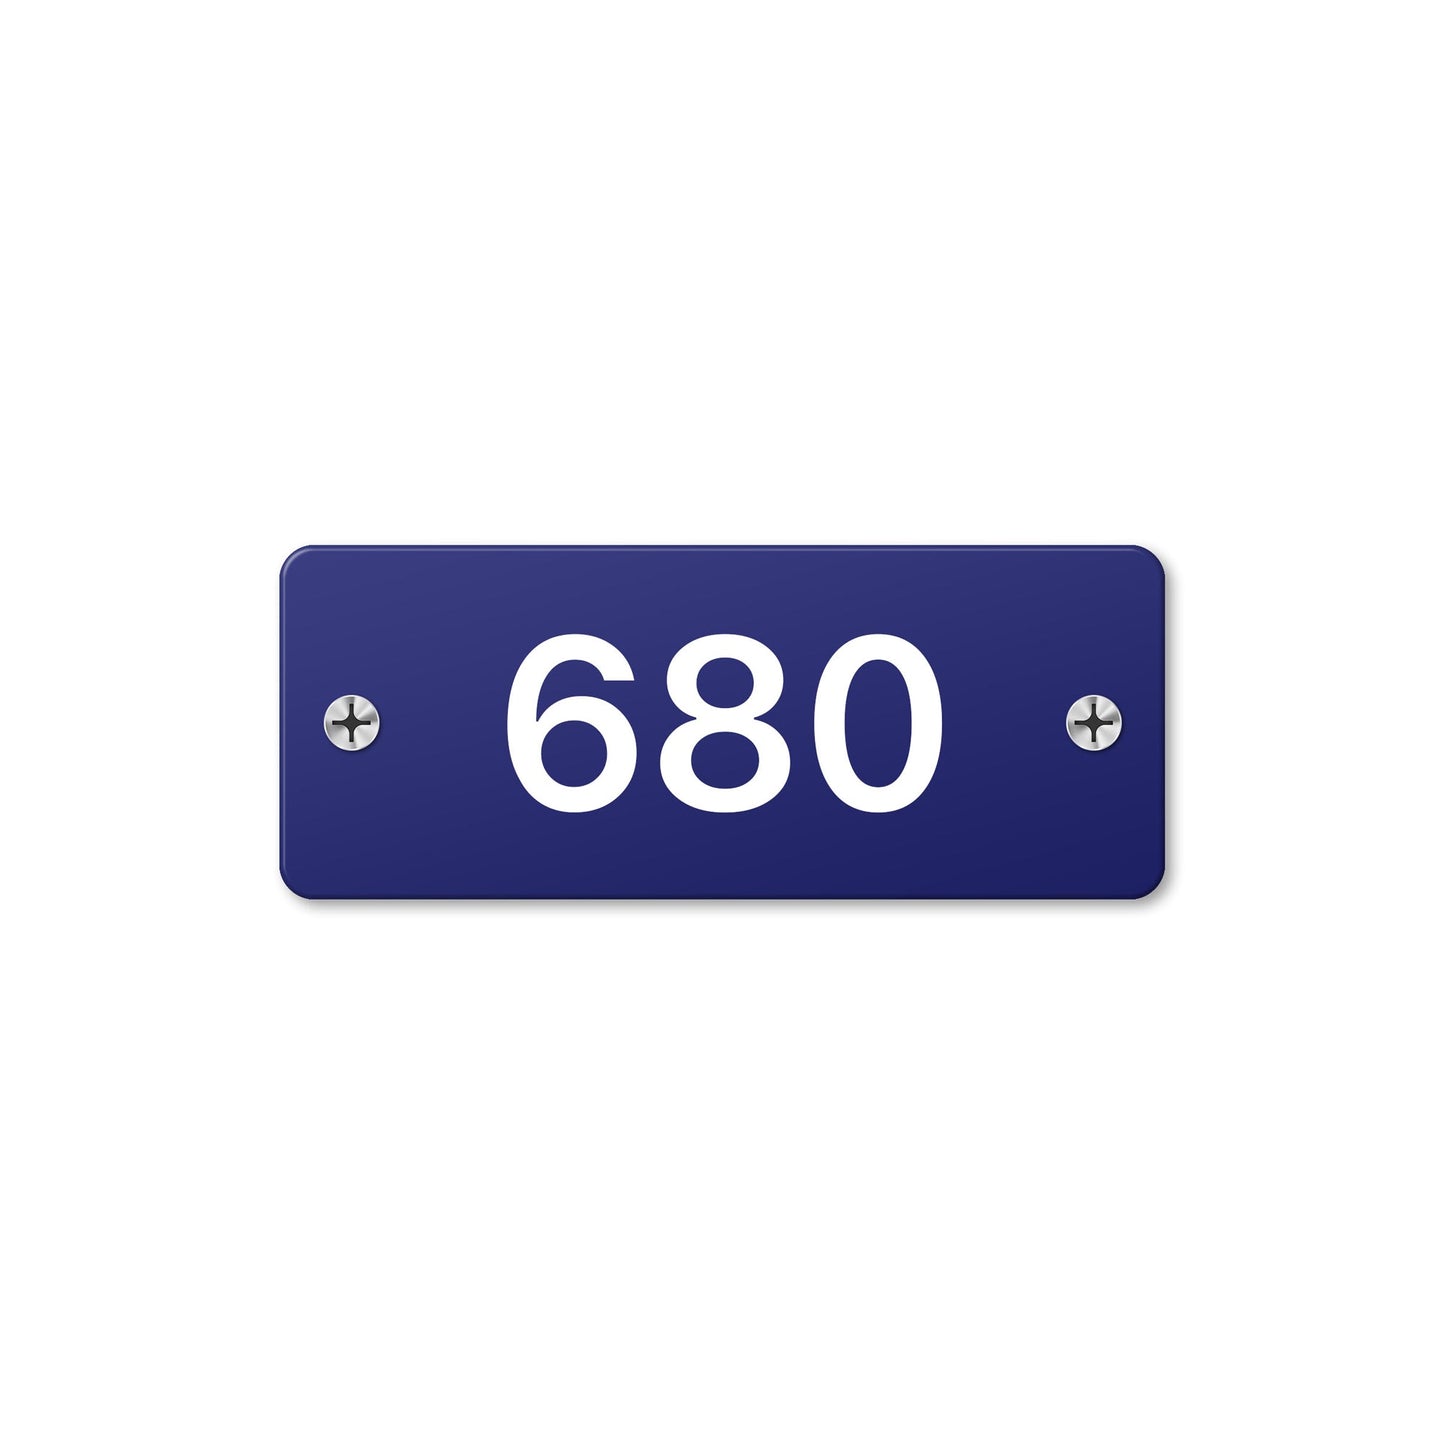 Numeral 680